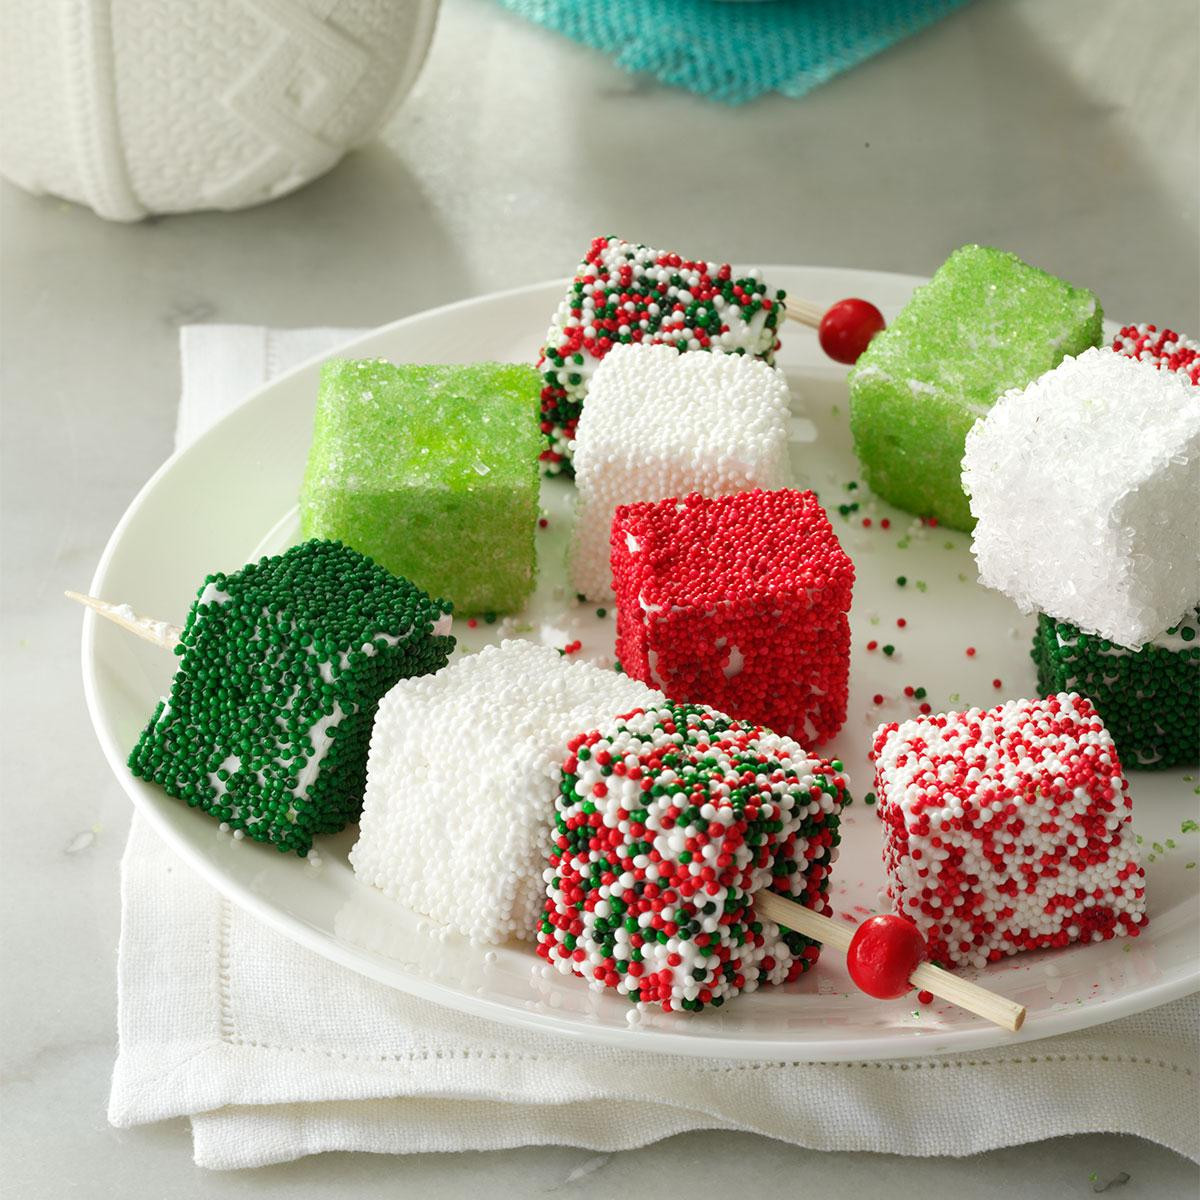 Traditional Christmas Candy
 Homemade Holiday Marshmallows Recipe